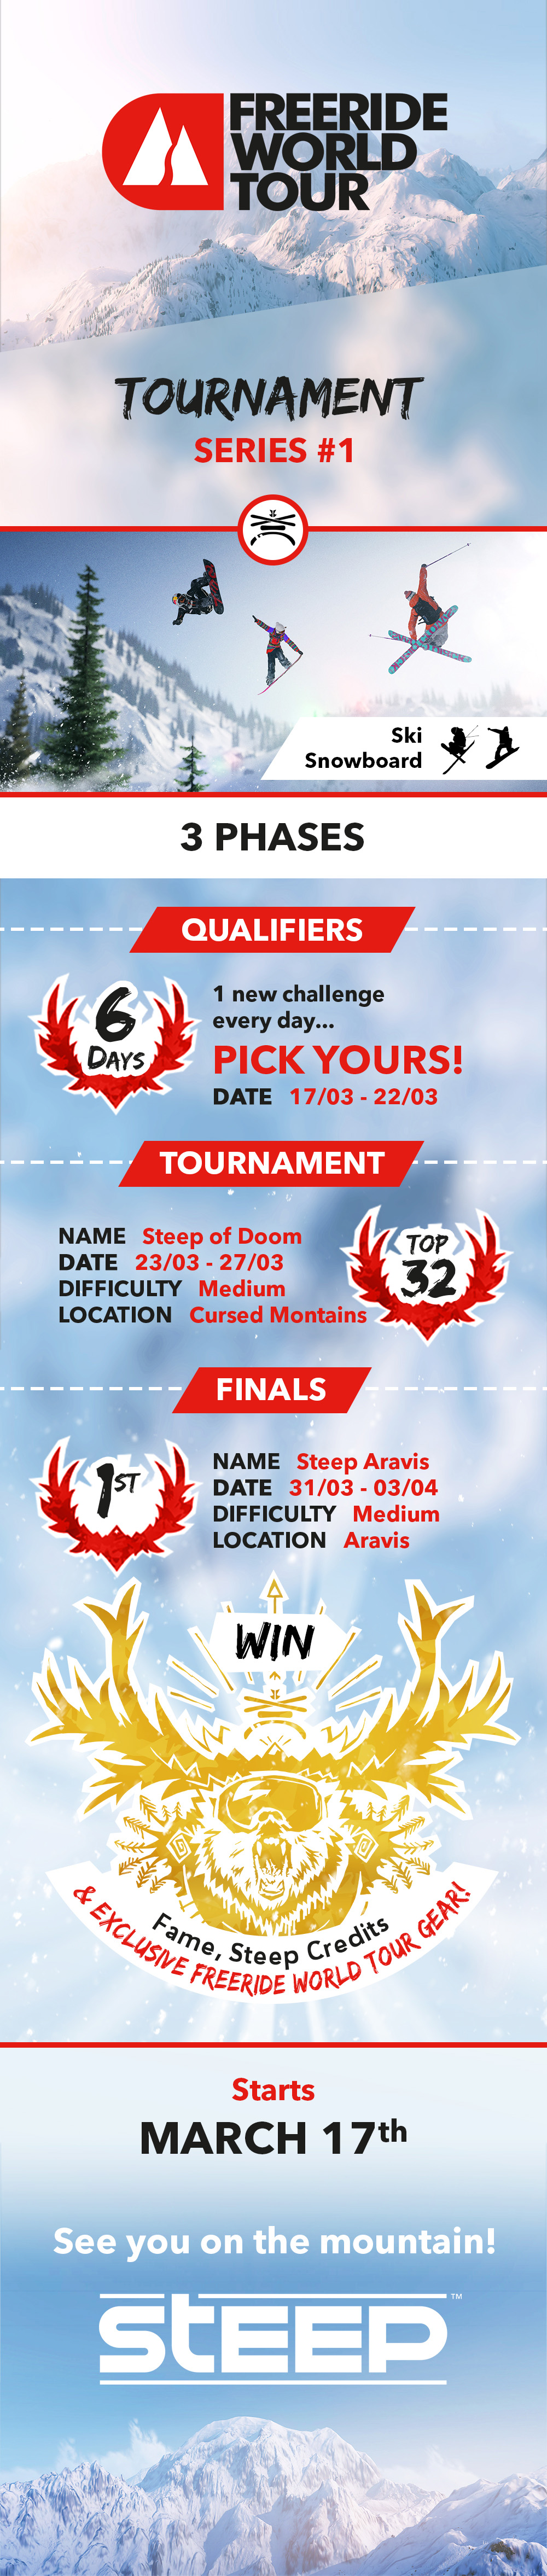 fwt_series1_infographic_final